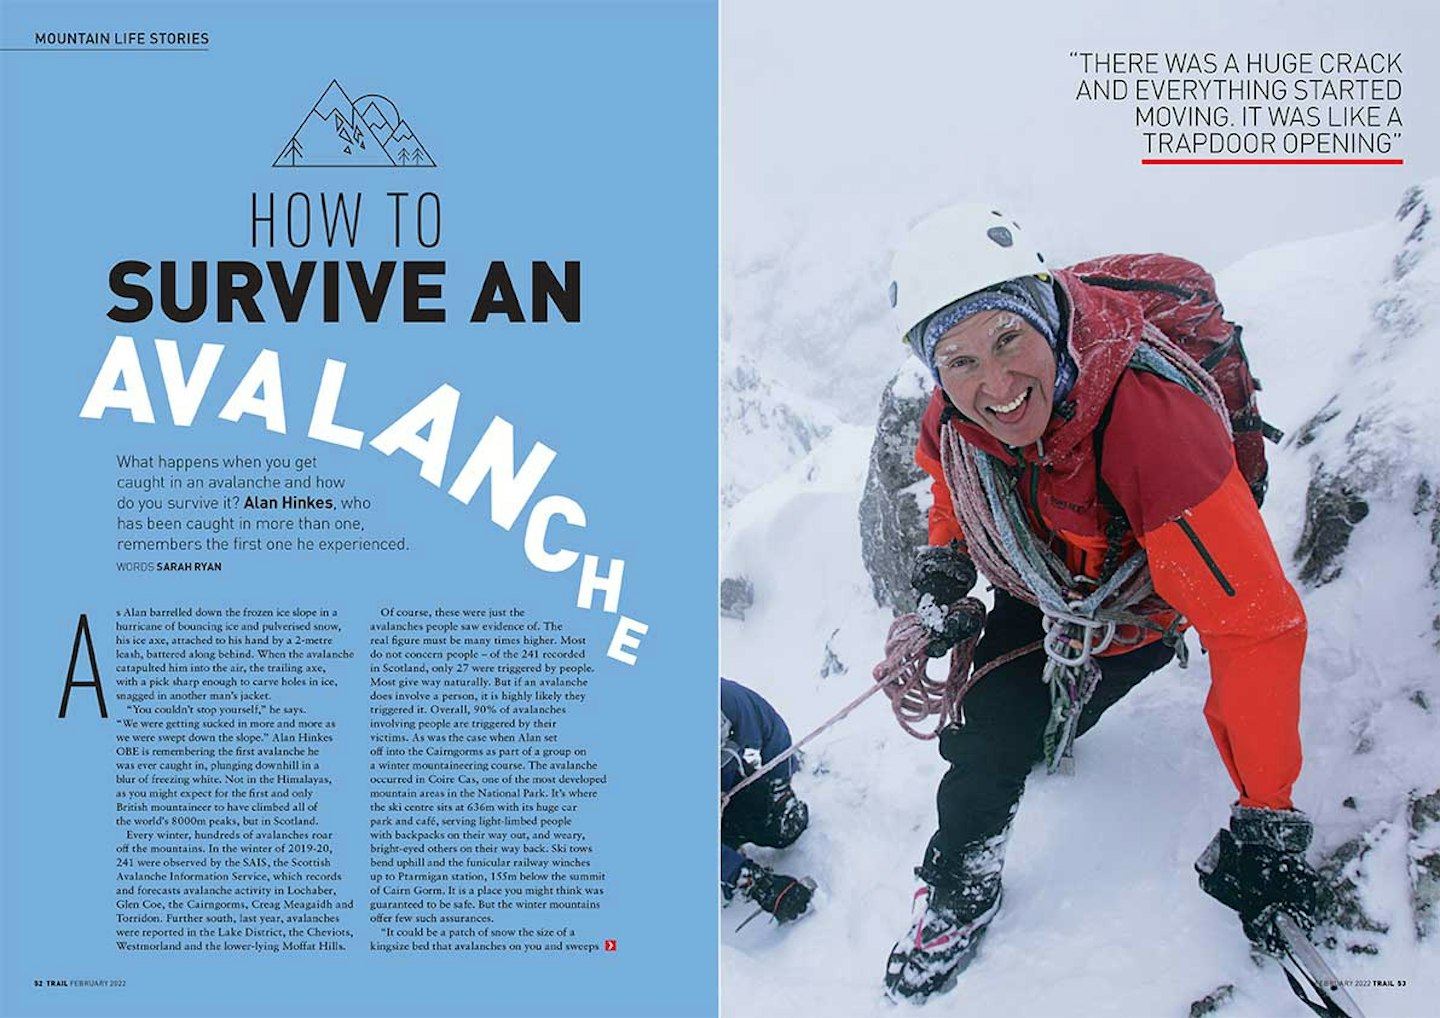 How to survive an avalanche